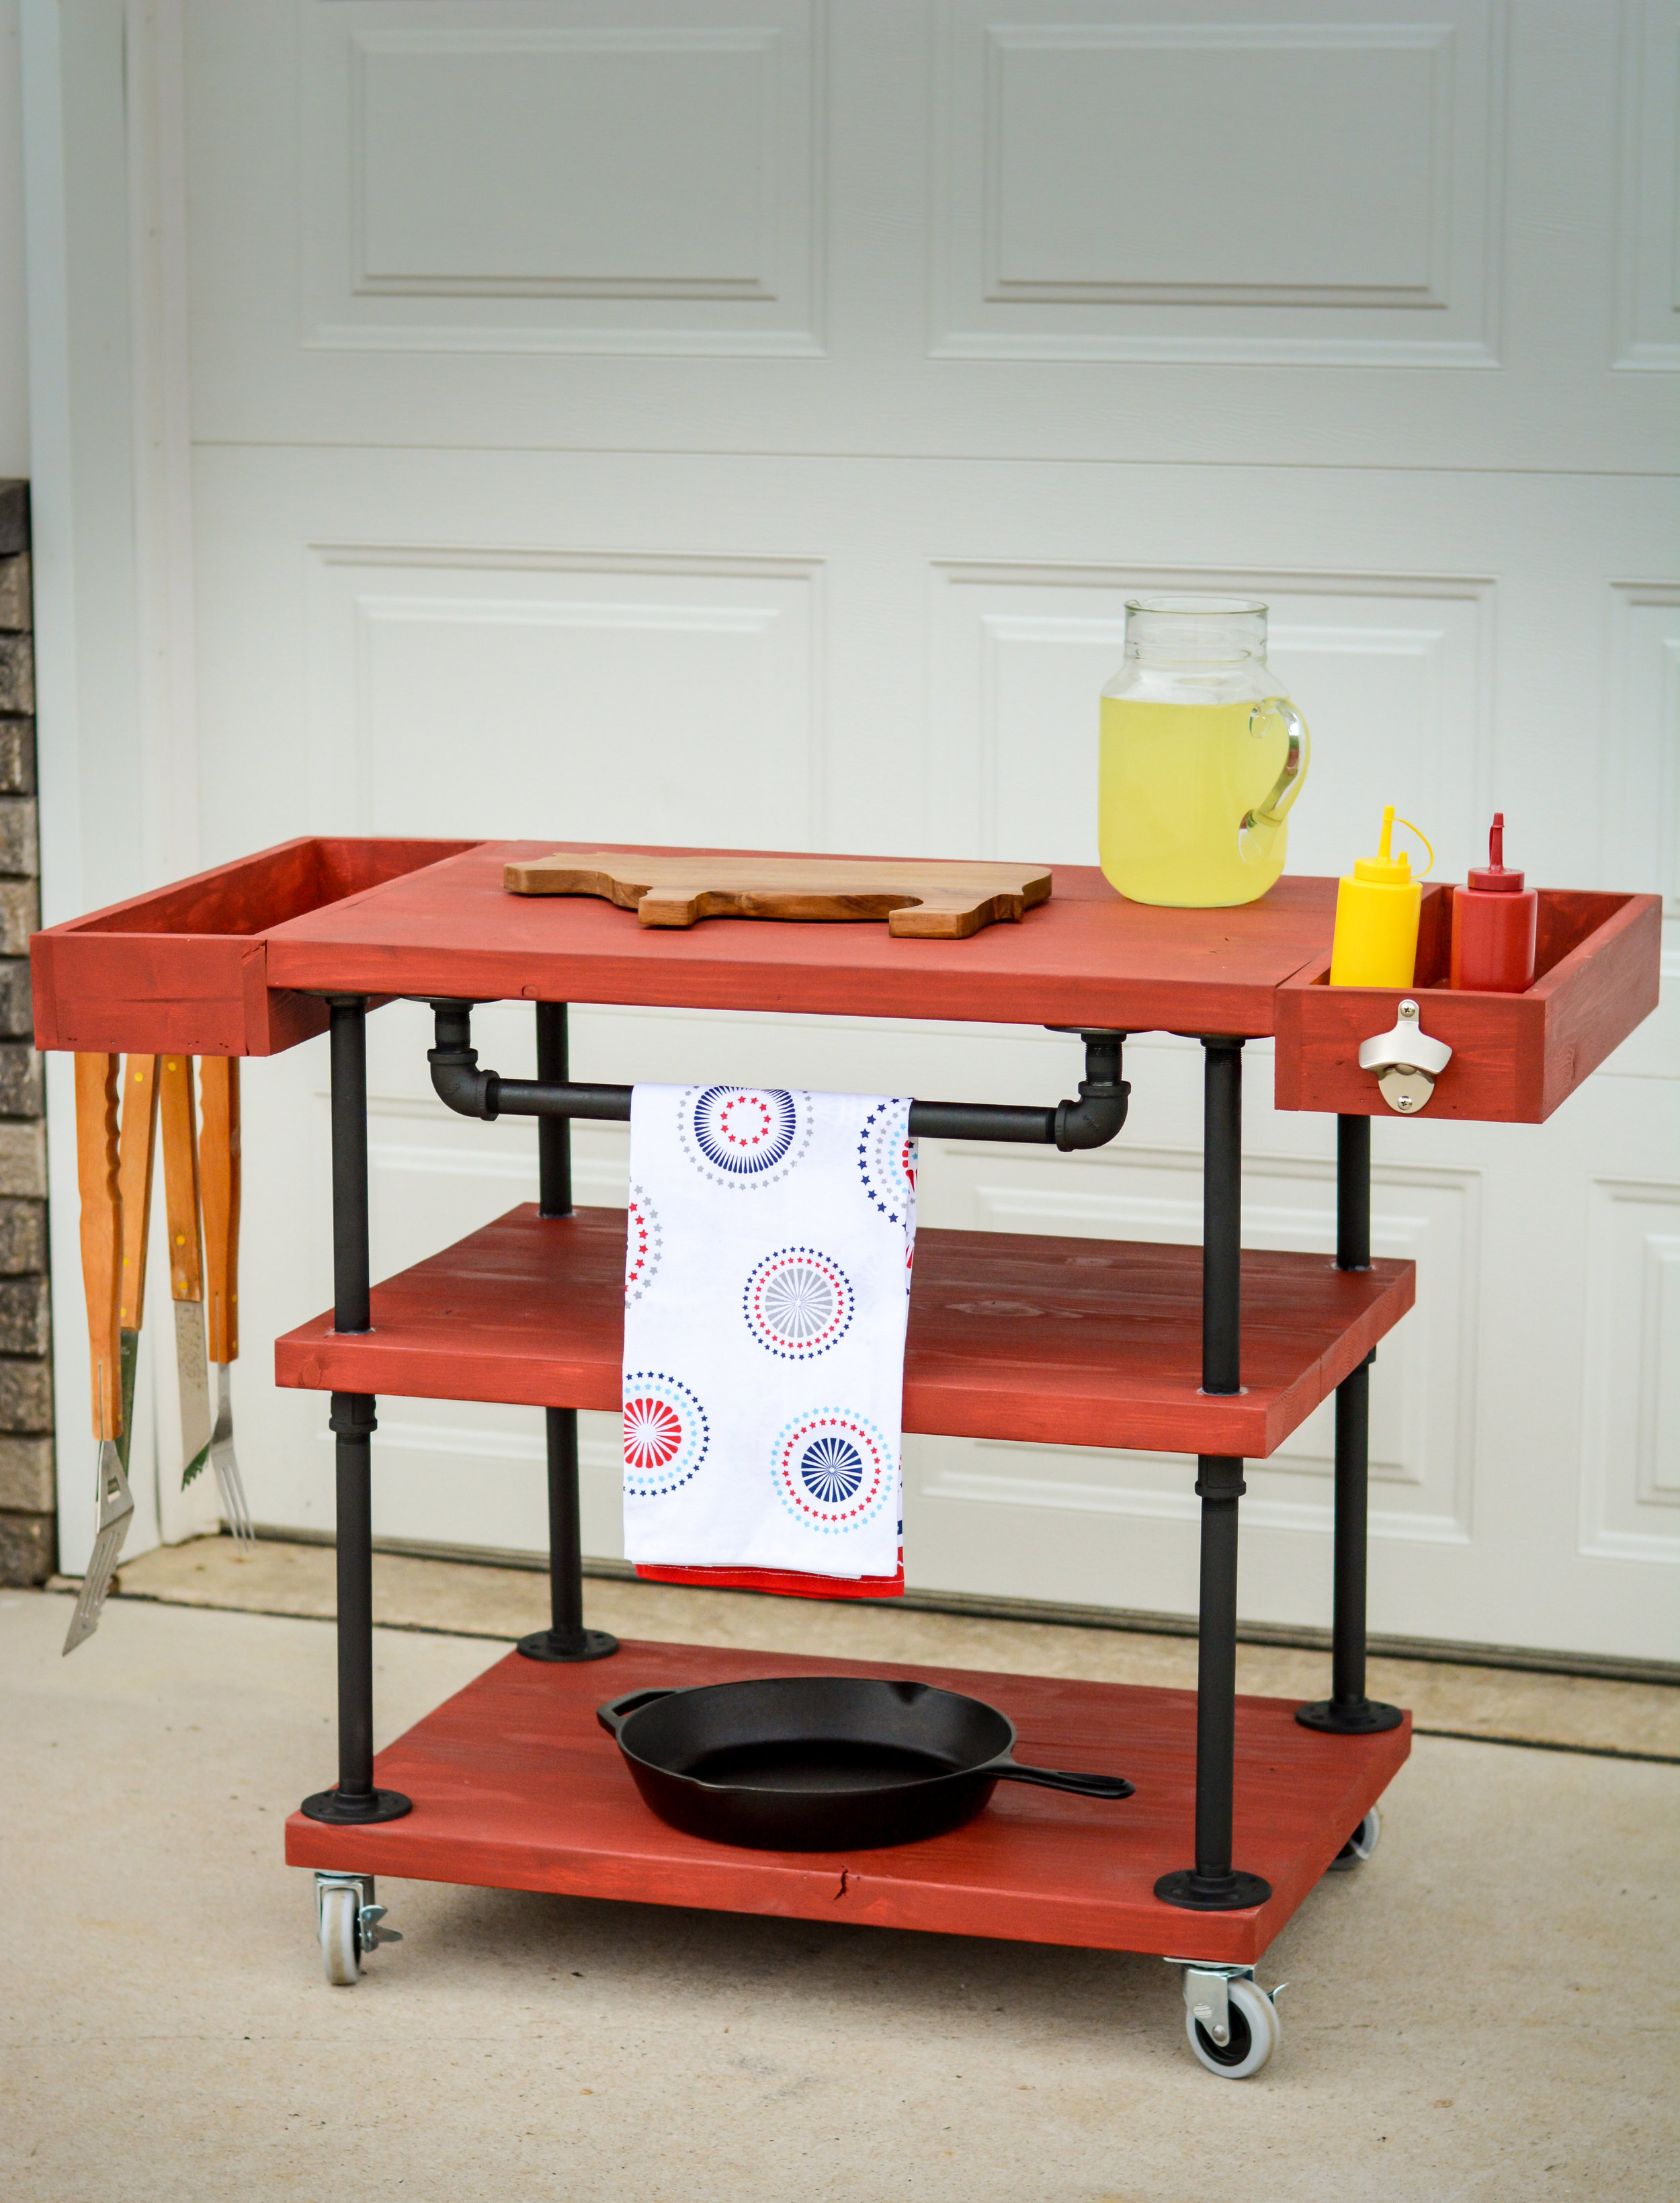 How To Build A Grill Cart The Home Depot Diy Workshop Decor